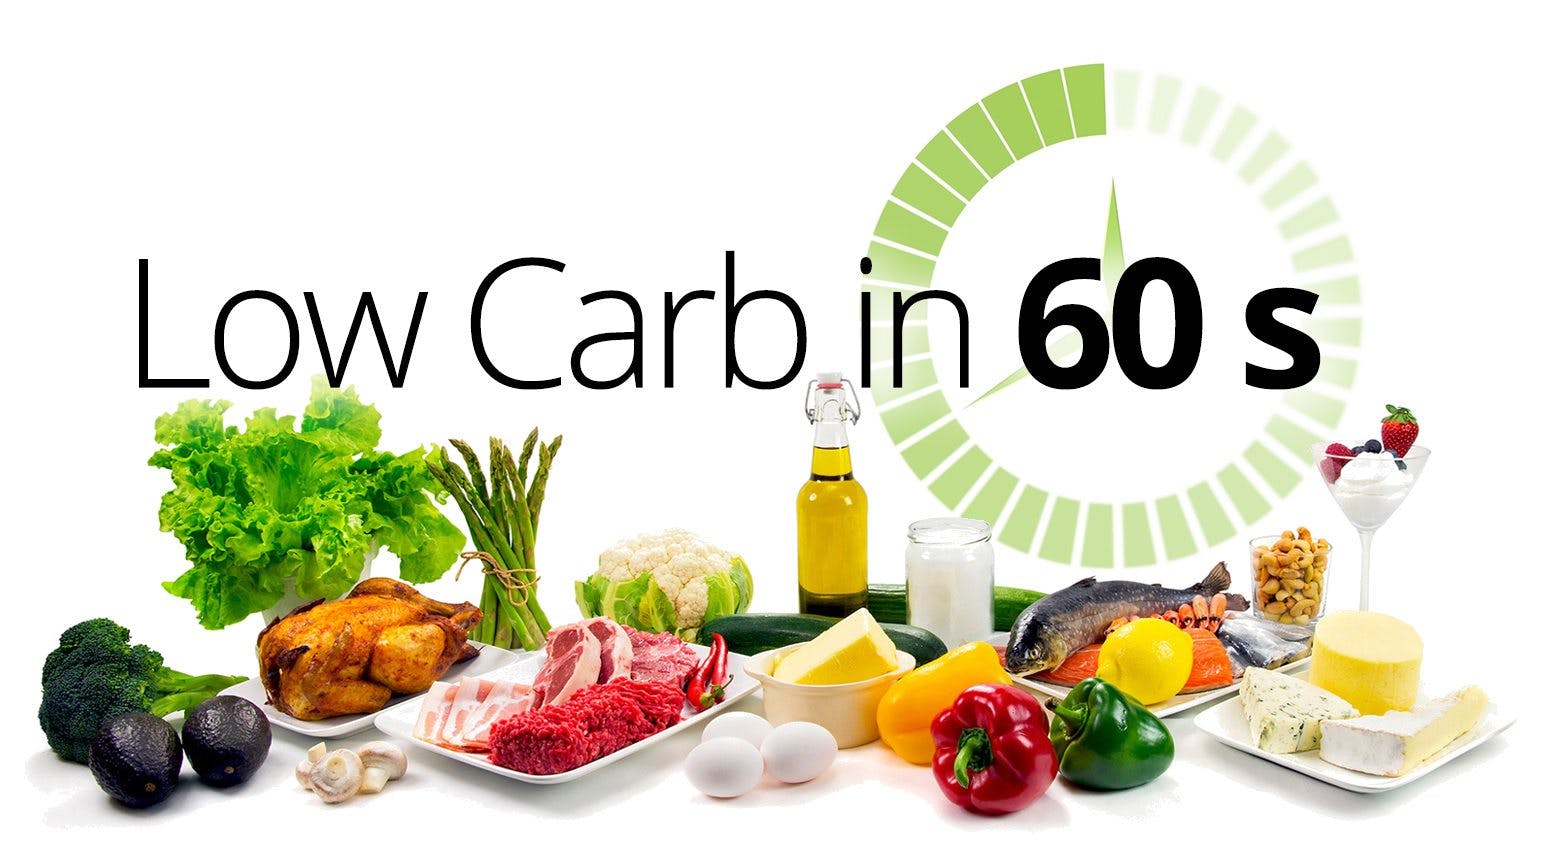 Low carb in 60 seconds - Diet Doctor